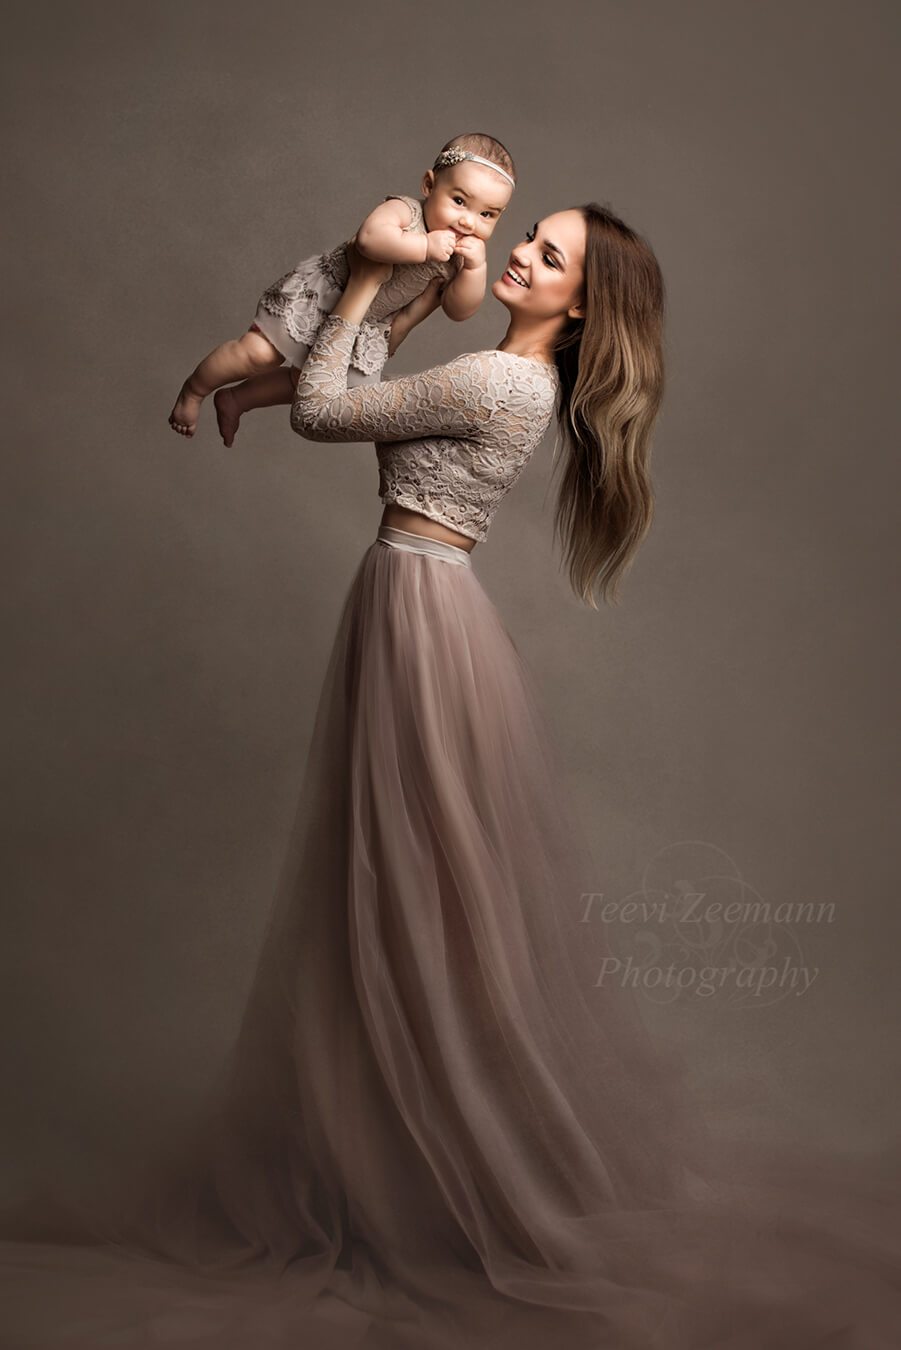 Dark blond model poses with her baby during a photoshoot. She wears a lace top with long sleeves and a tulle long skirt. Her baby has a matching dress also made of lace. She holds her baby up while smiling at her.